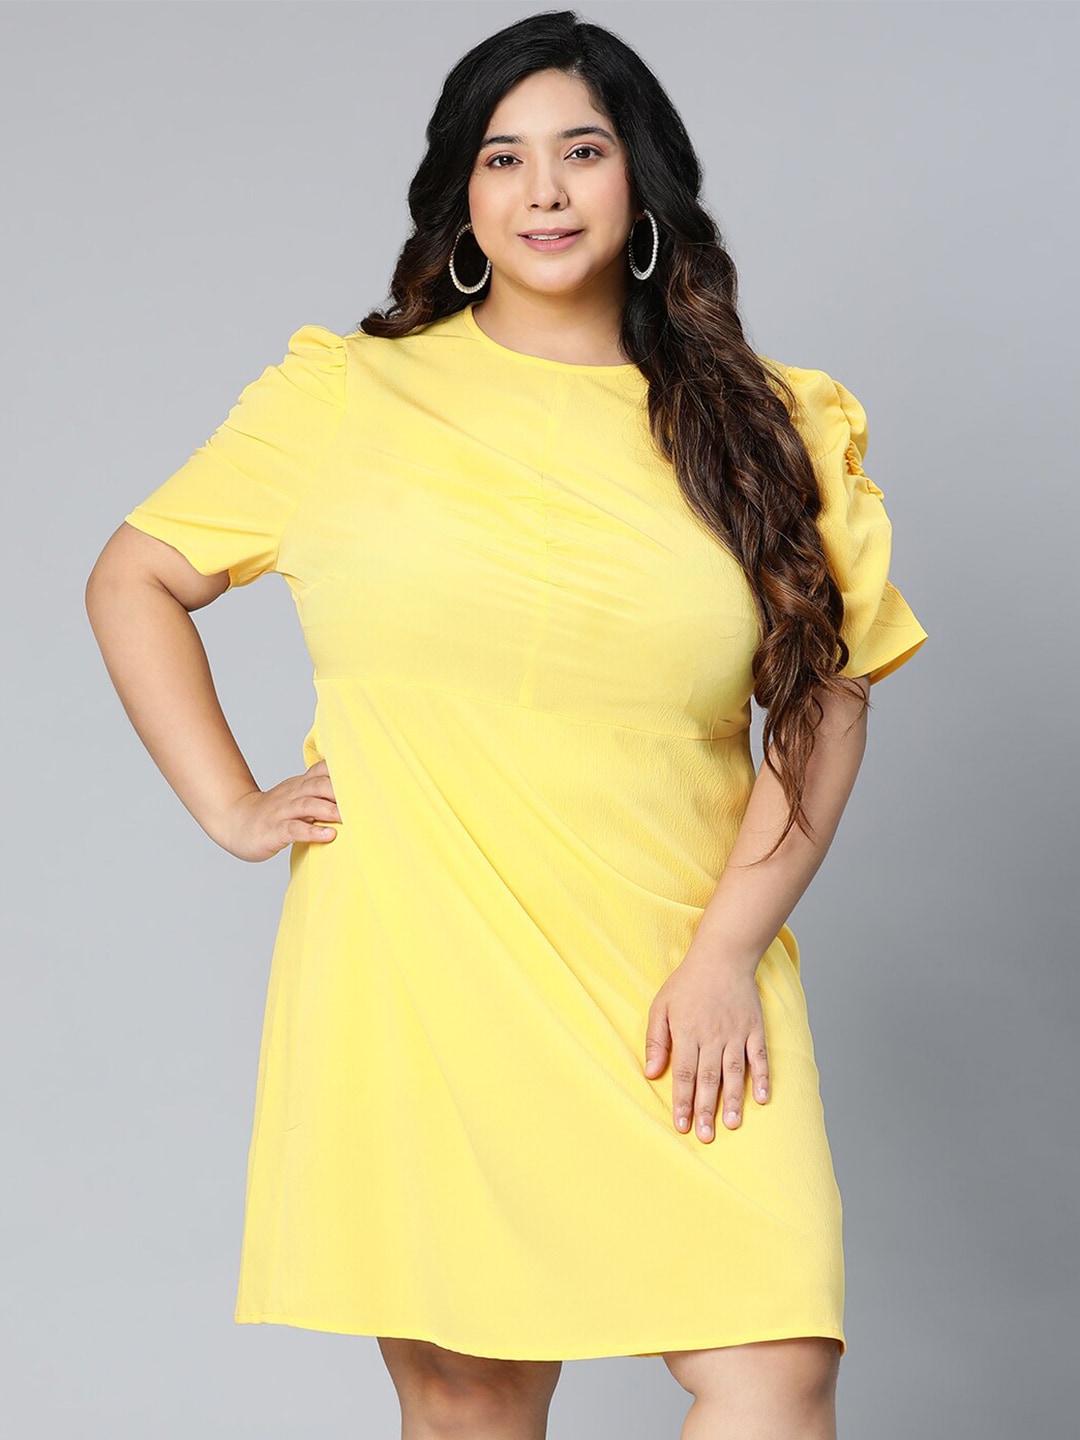 Oxolloxo Plus Size Yellow Solid Satin A-Line Mini Dress Price in India